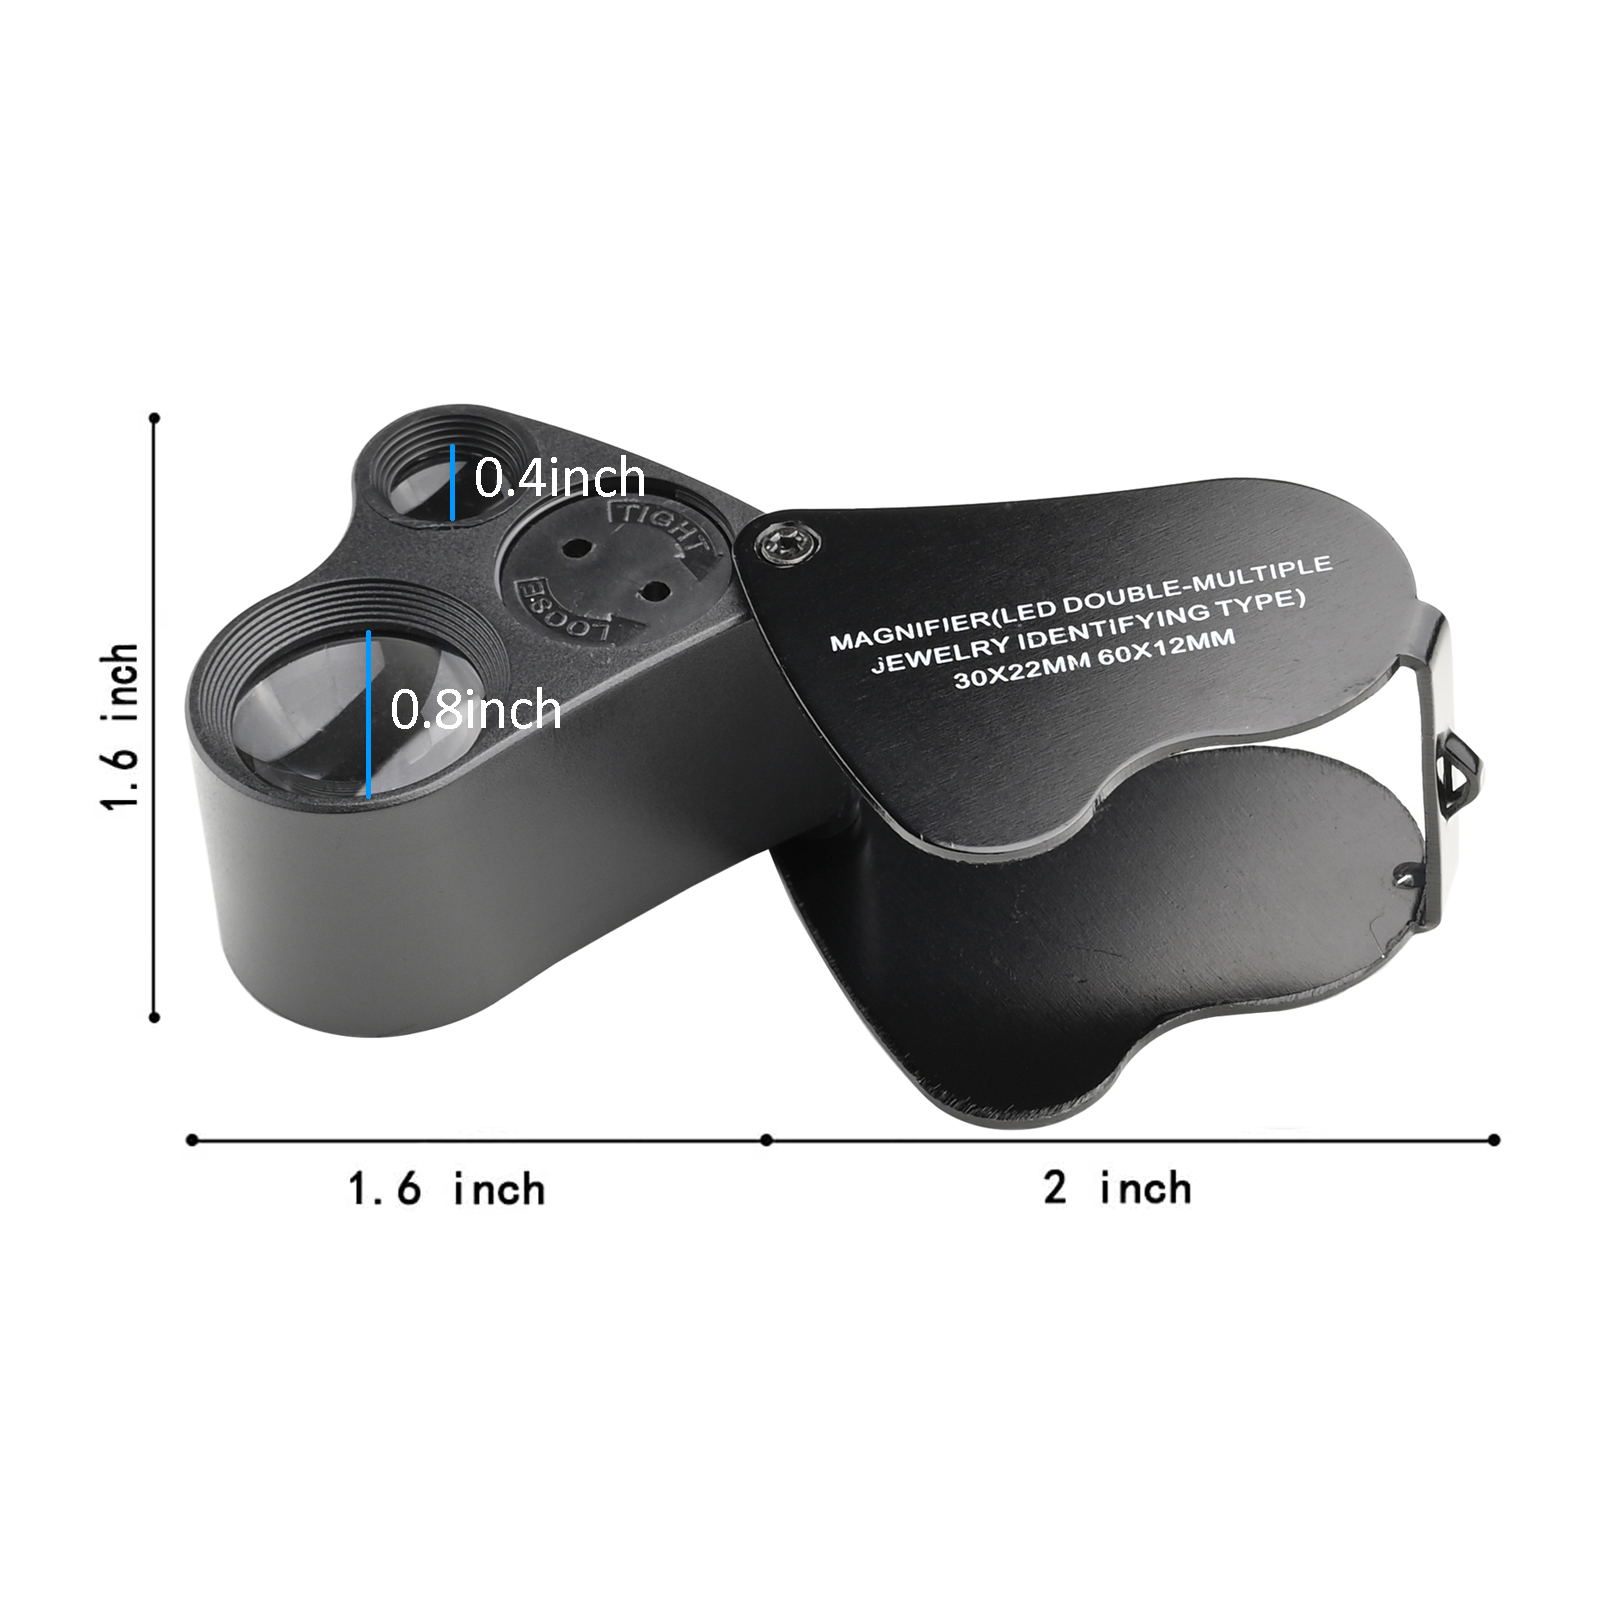 Stonego 1pc 30x Magnification Foldable Pocket Jewelry Loupe Magnifier,  Portable Magnifying Glass Eye Loop For Jewelers, Gems, Rhinestones, Plants,  Coins